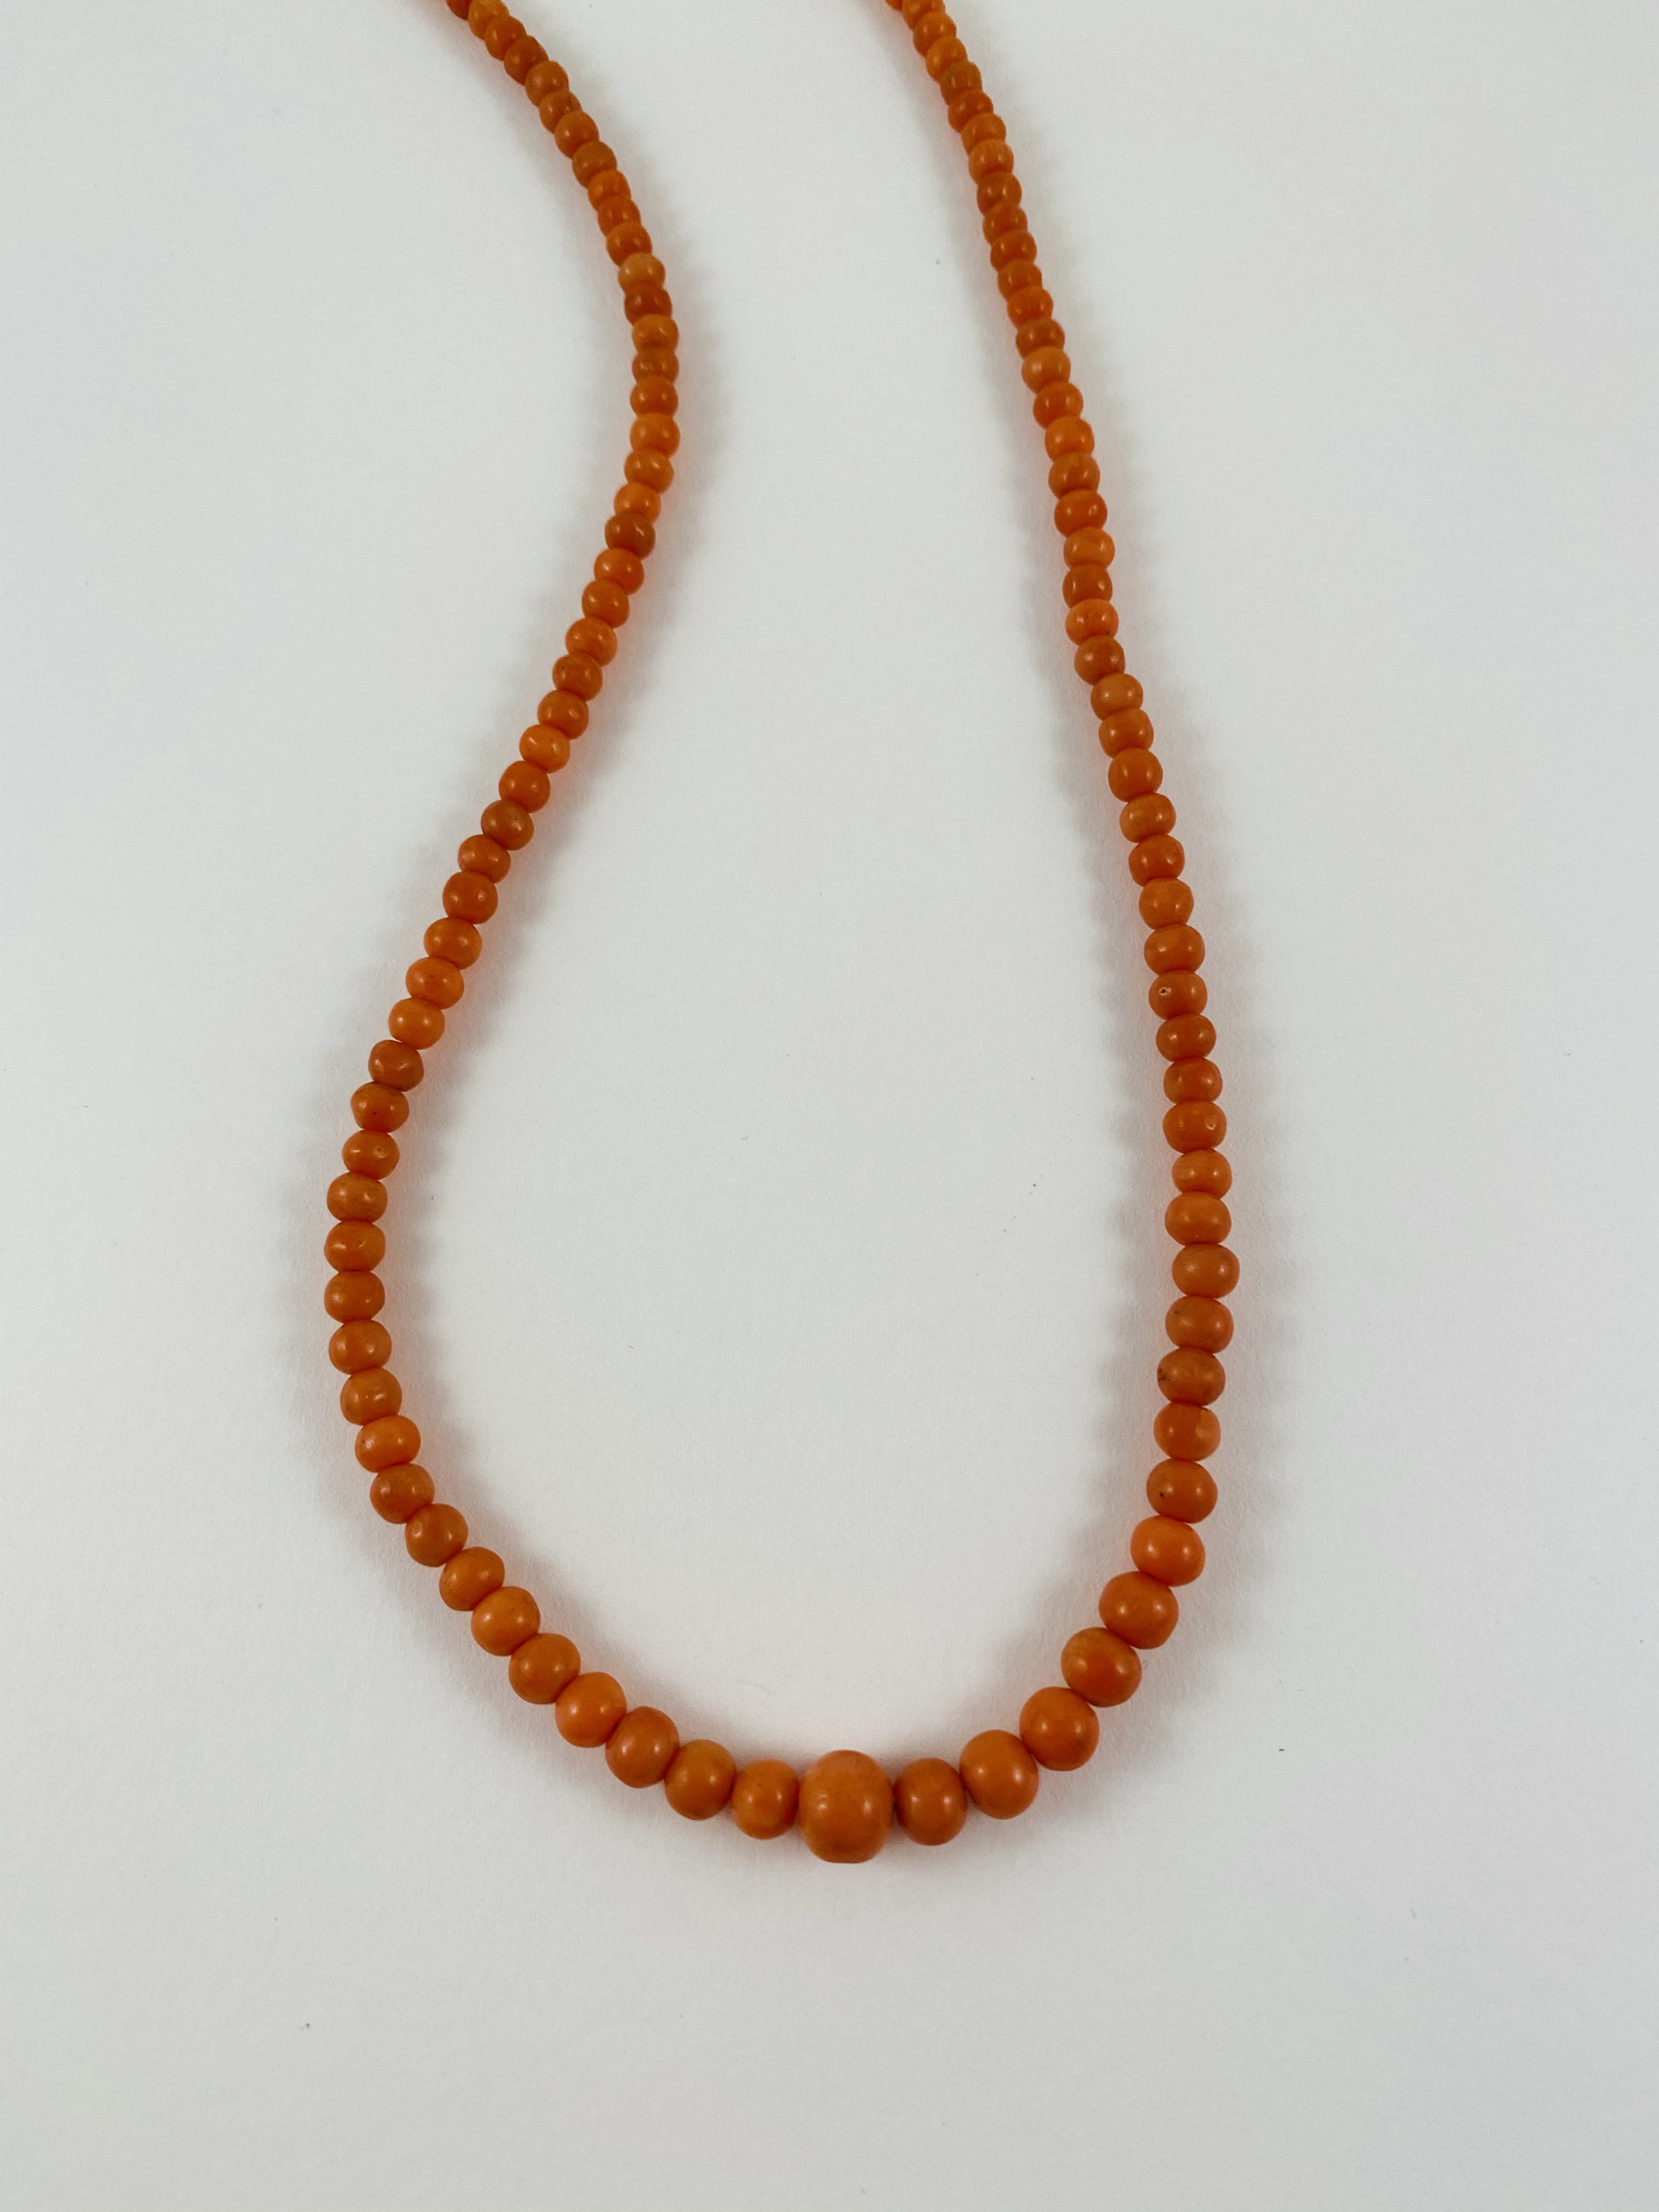 Vintage Coral Bead Necklace by Nance Trueworthy